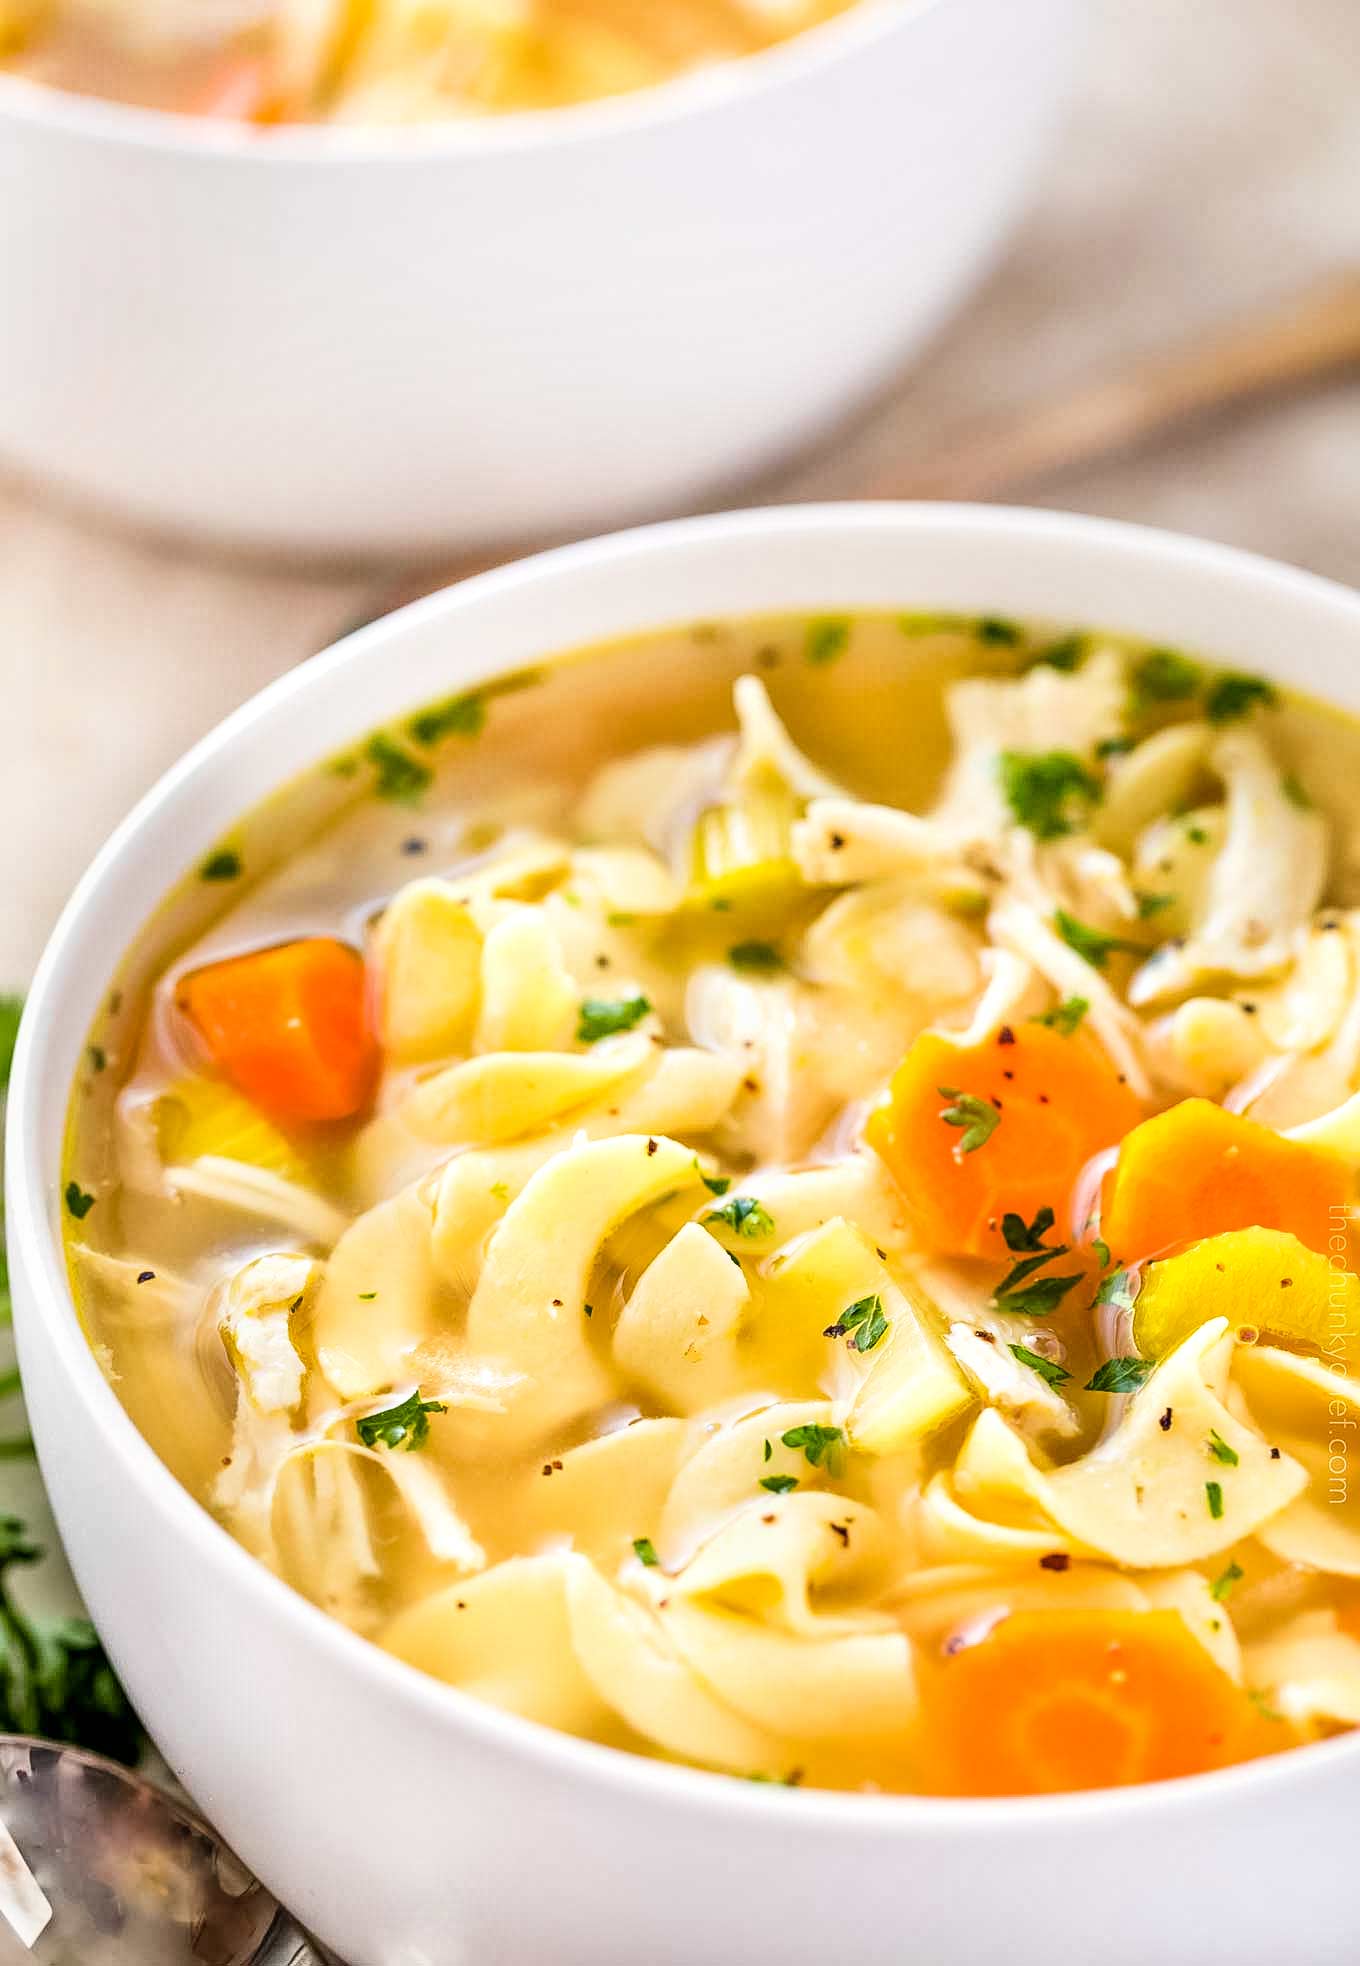 Homemade Crockpot Chicken Noodle Soup - The Chunky Chef